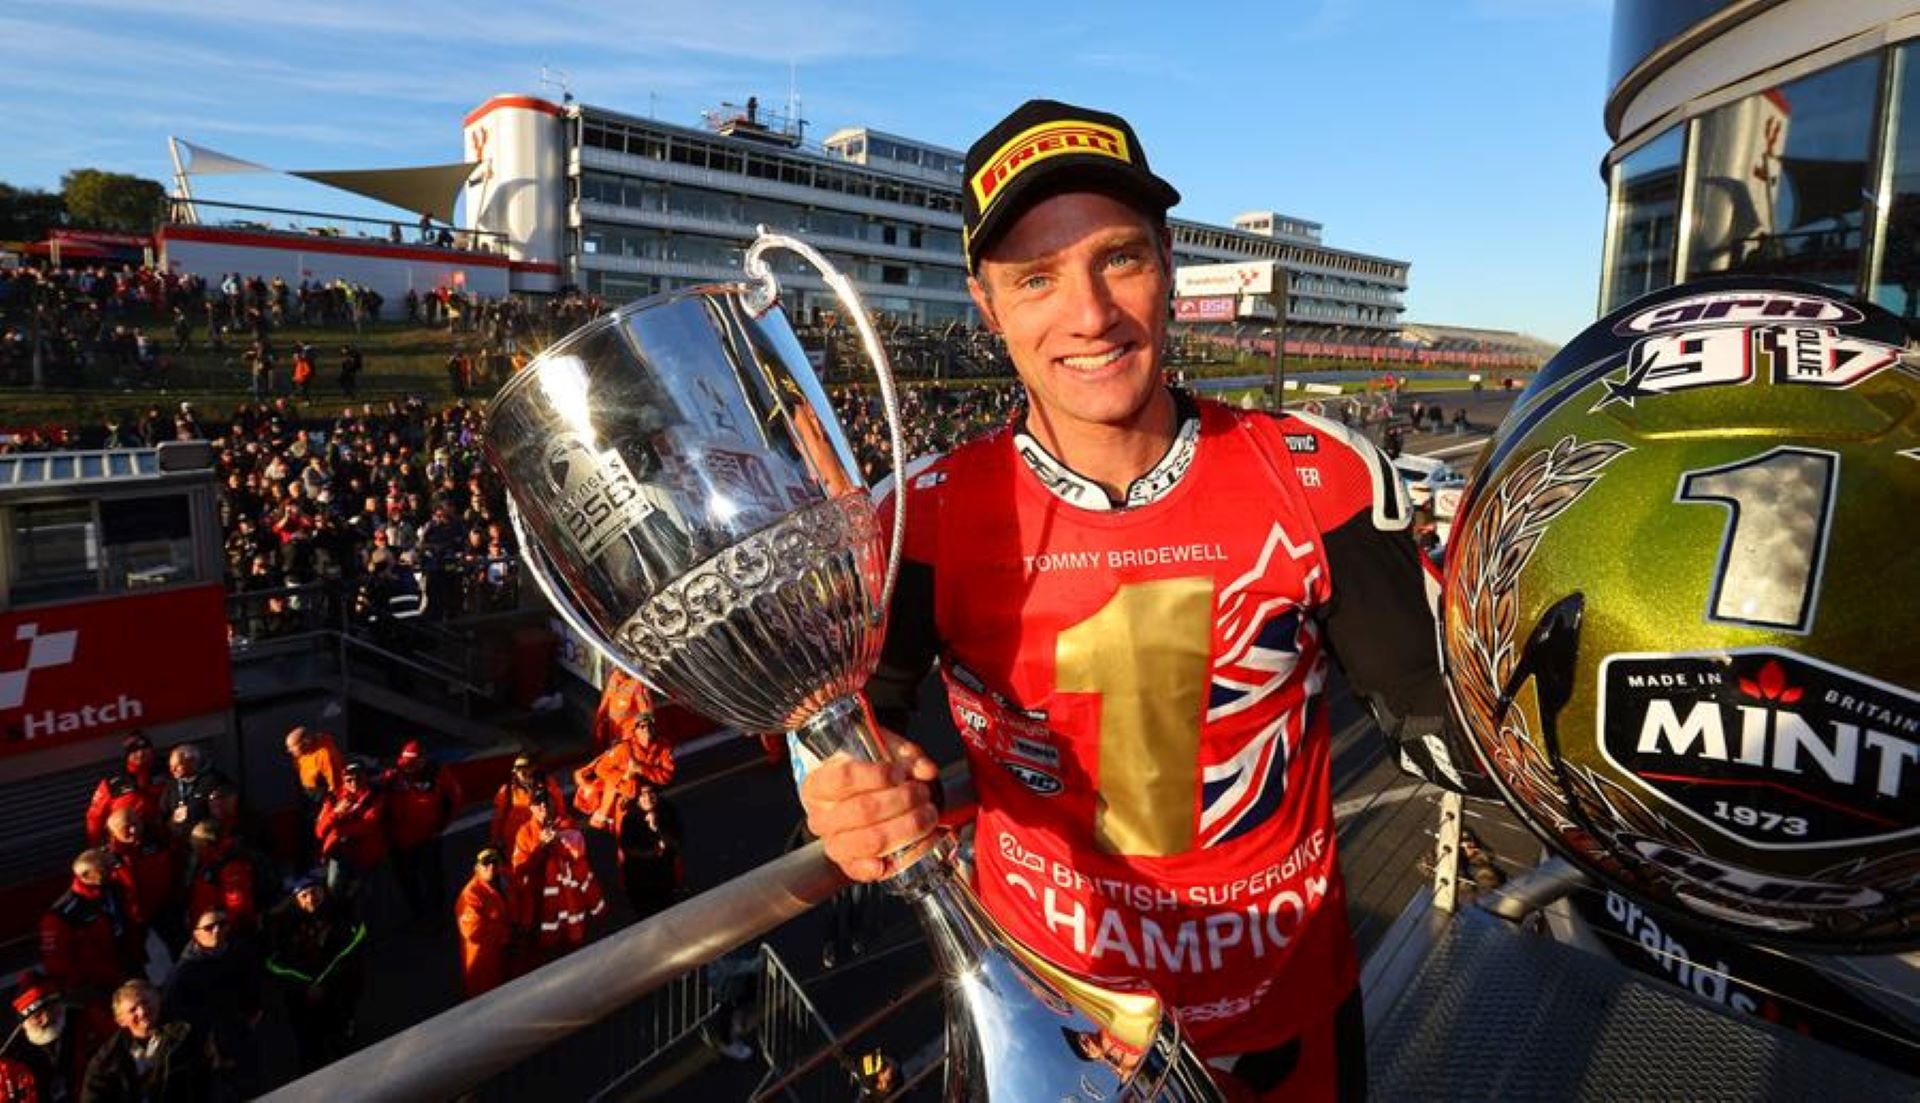 Meet the 2023 Bennetts British Superbike Champion at Motorcycle Live!